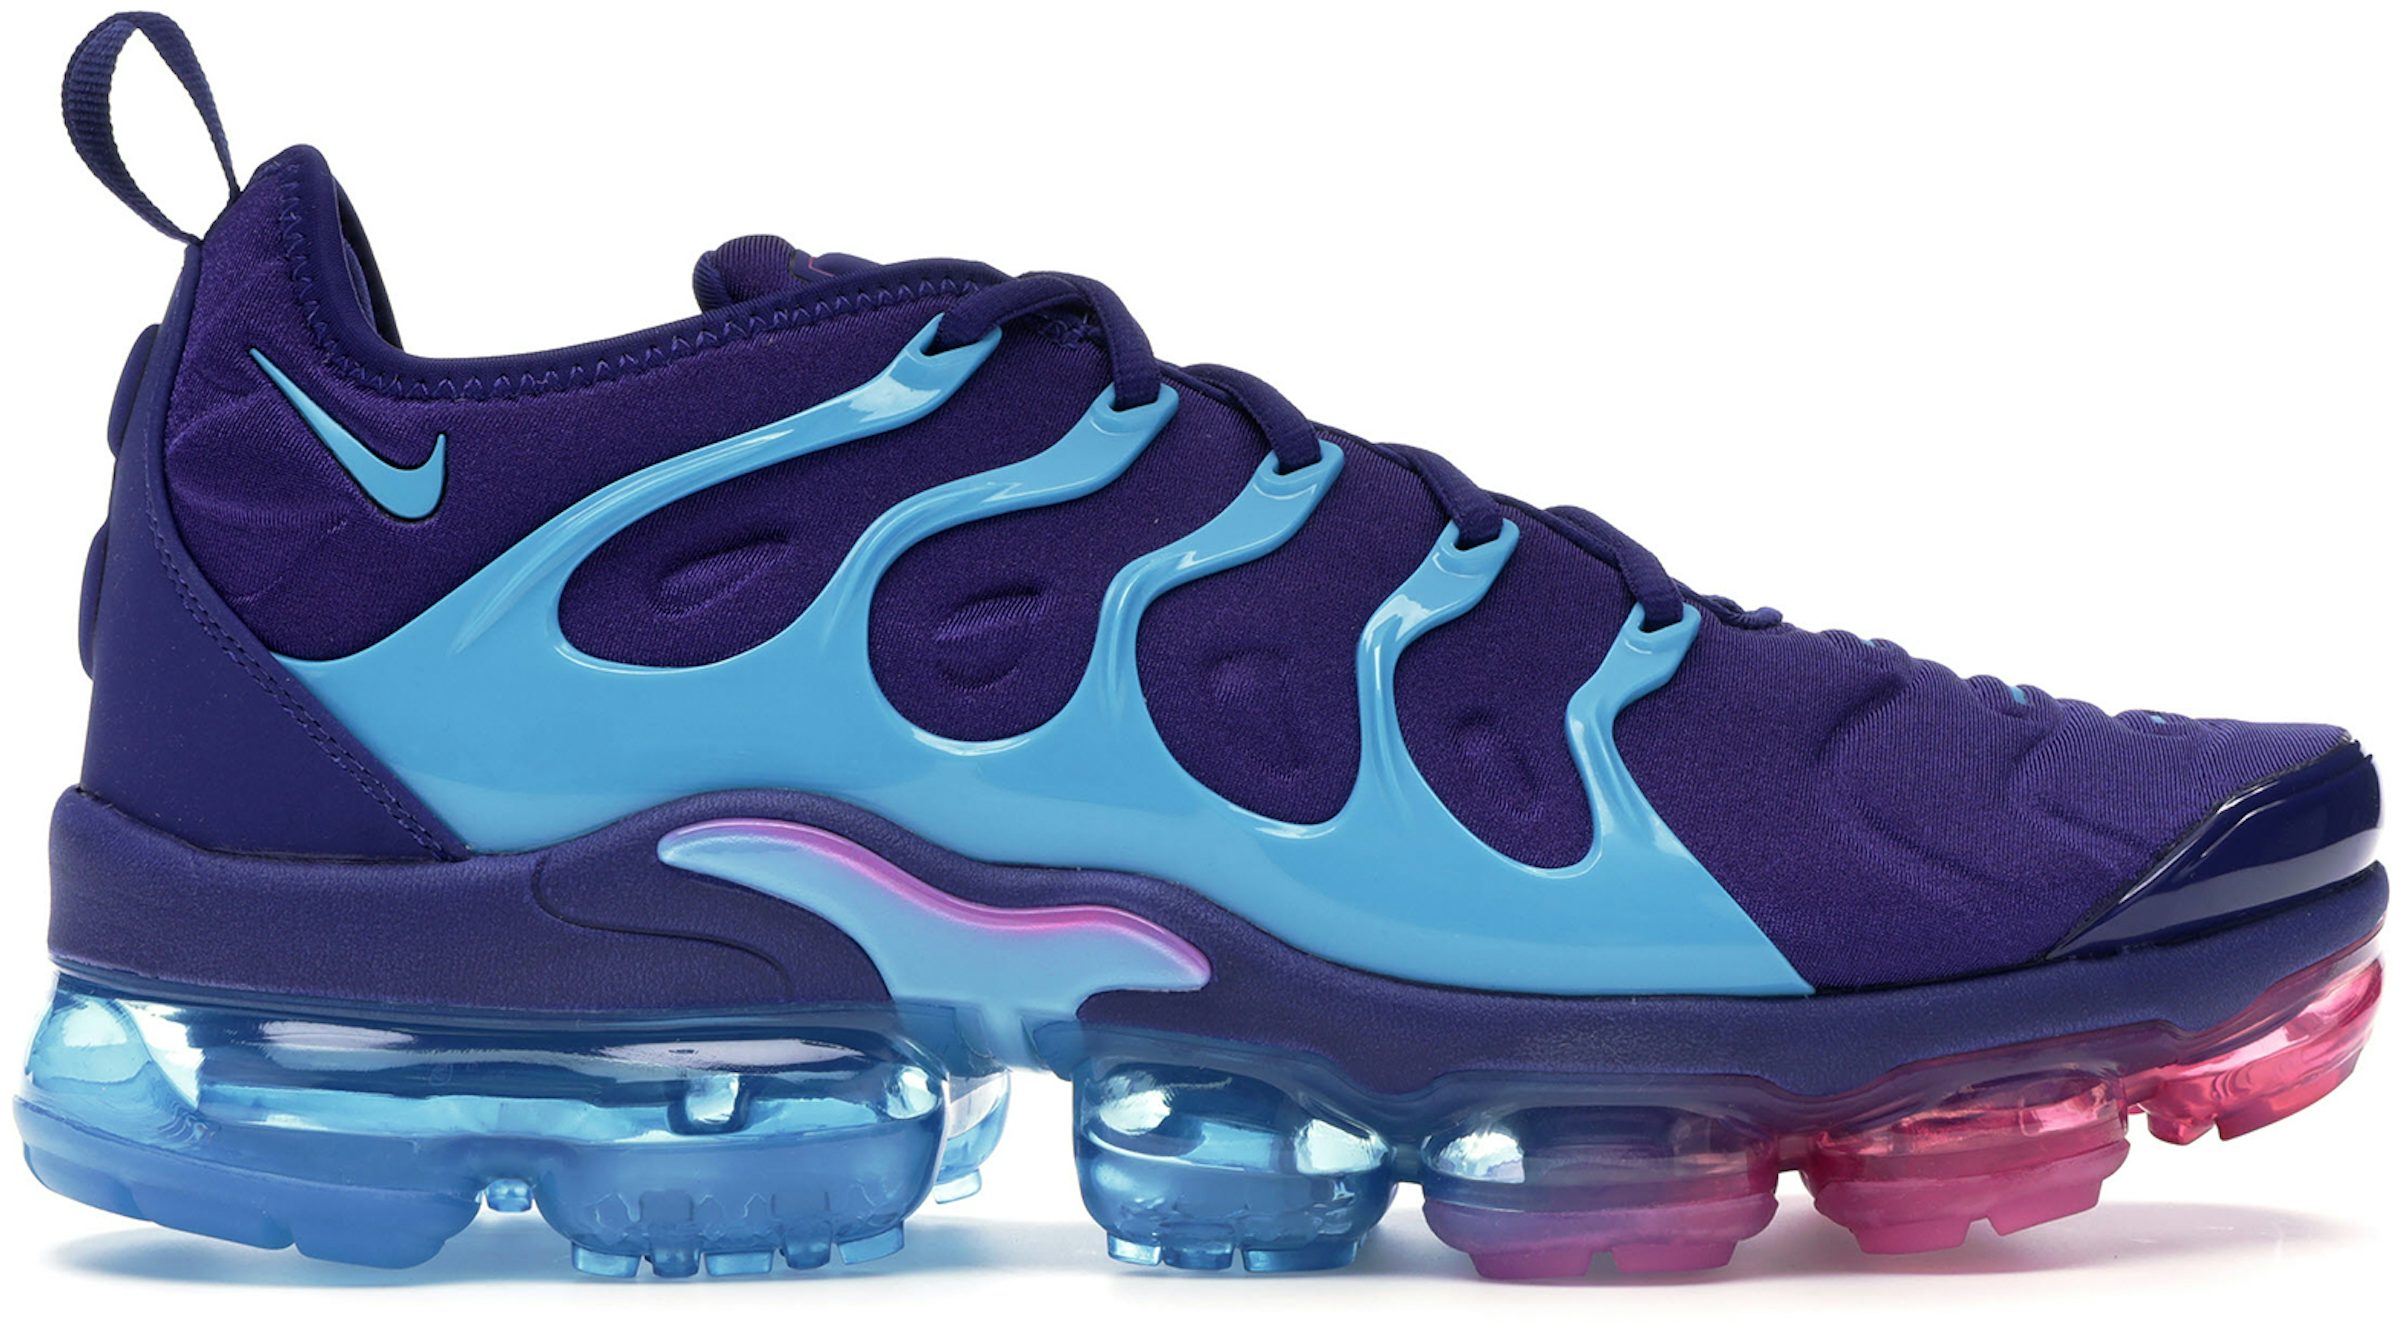 Nike Air VaporMax Plus Tennis Ball for Sale, Authenticity Guaranteed